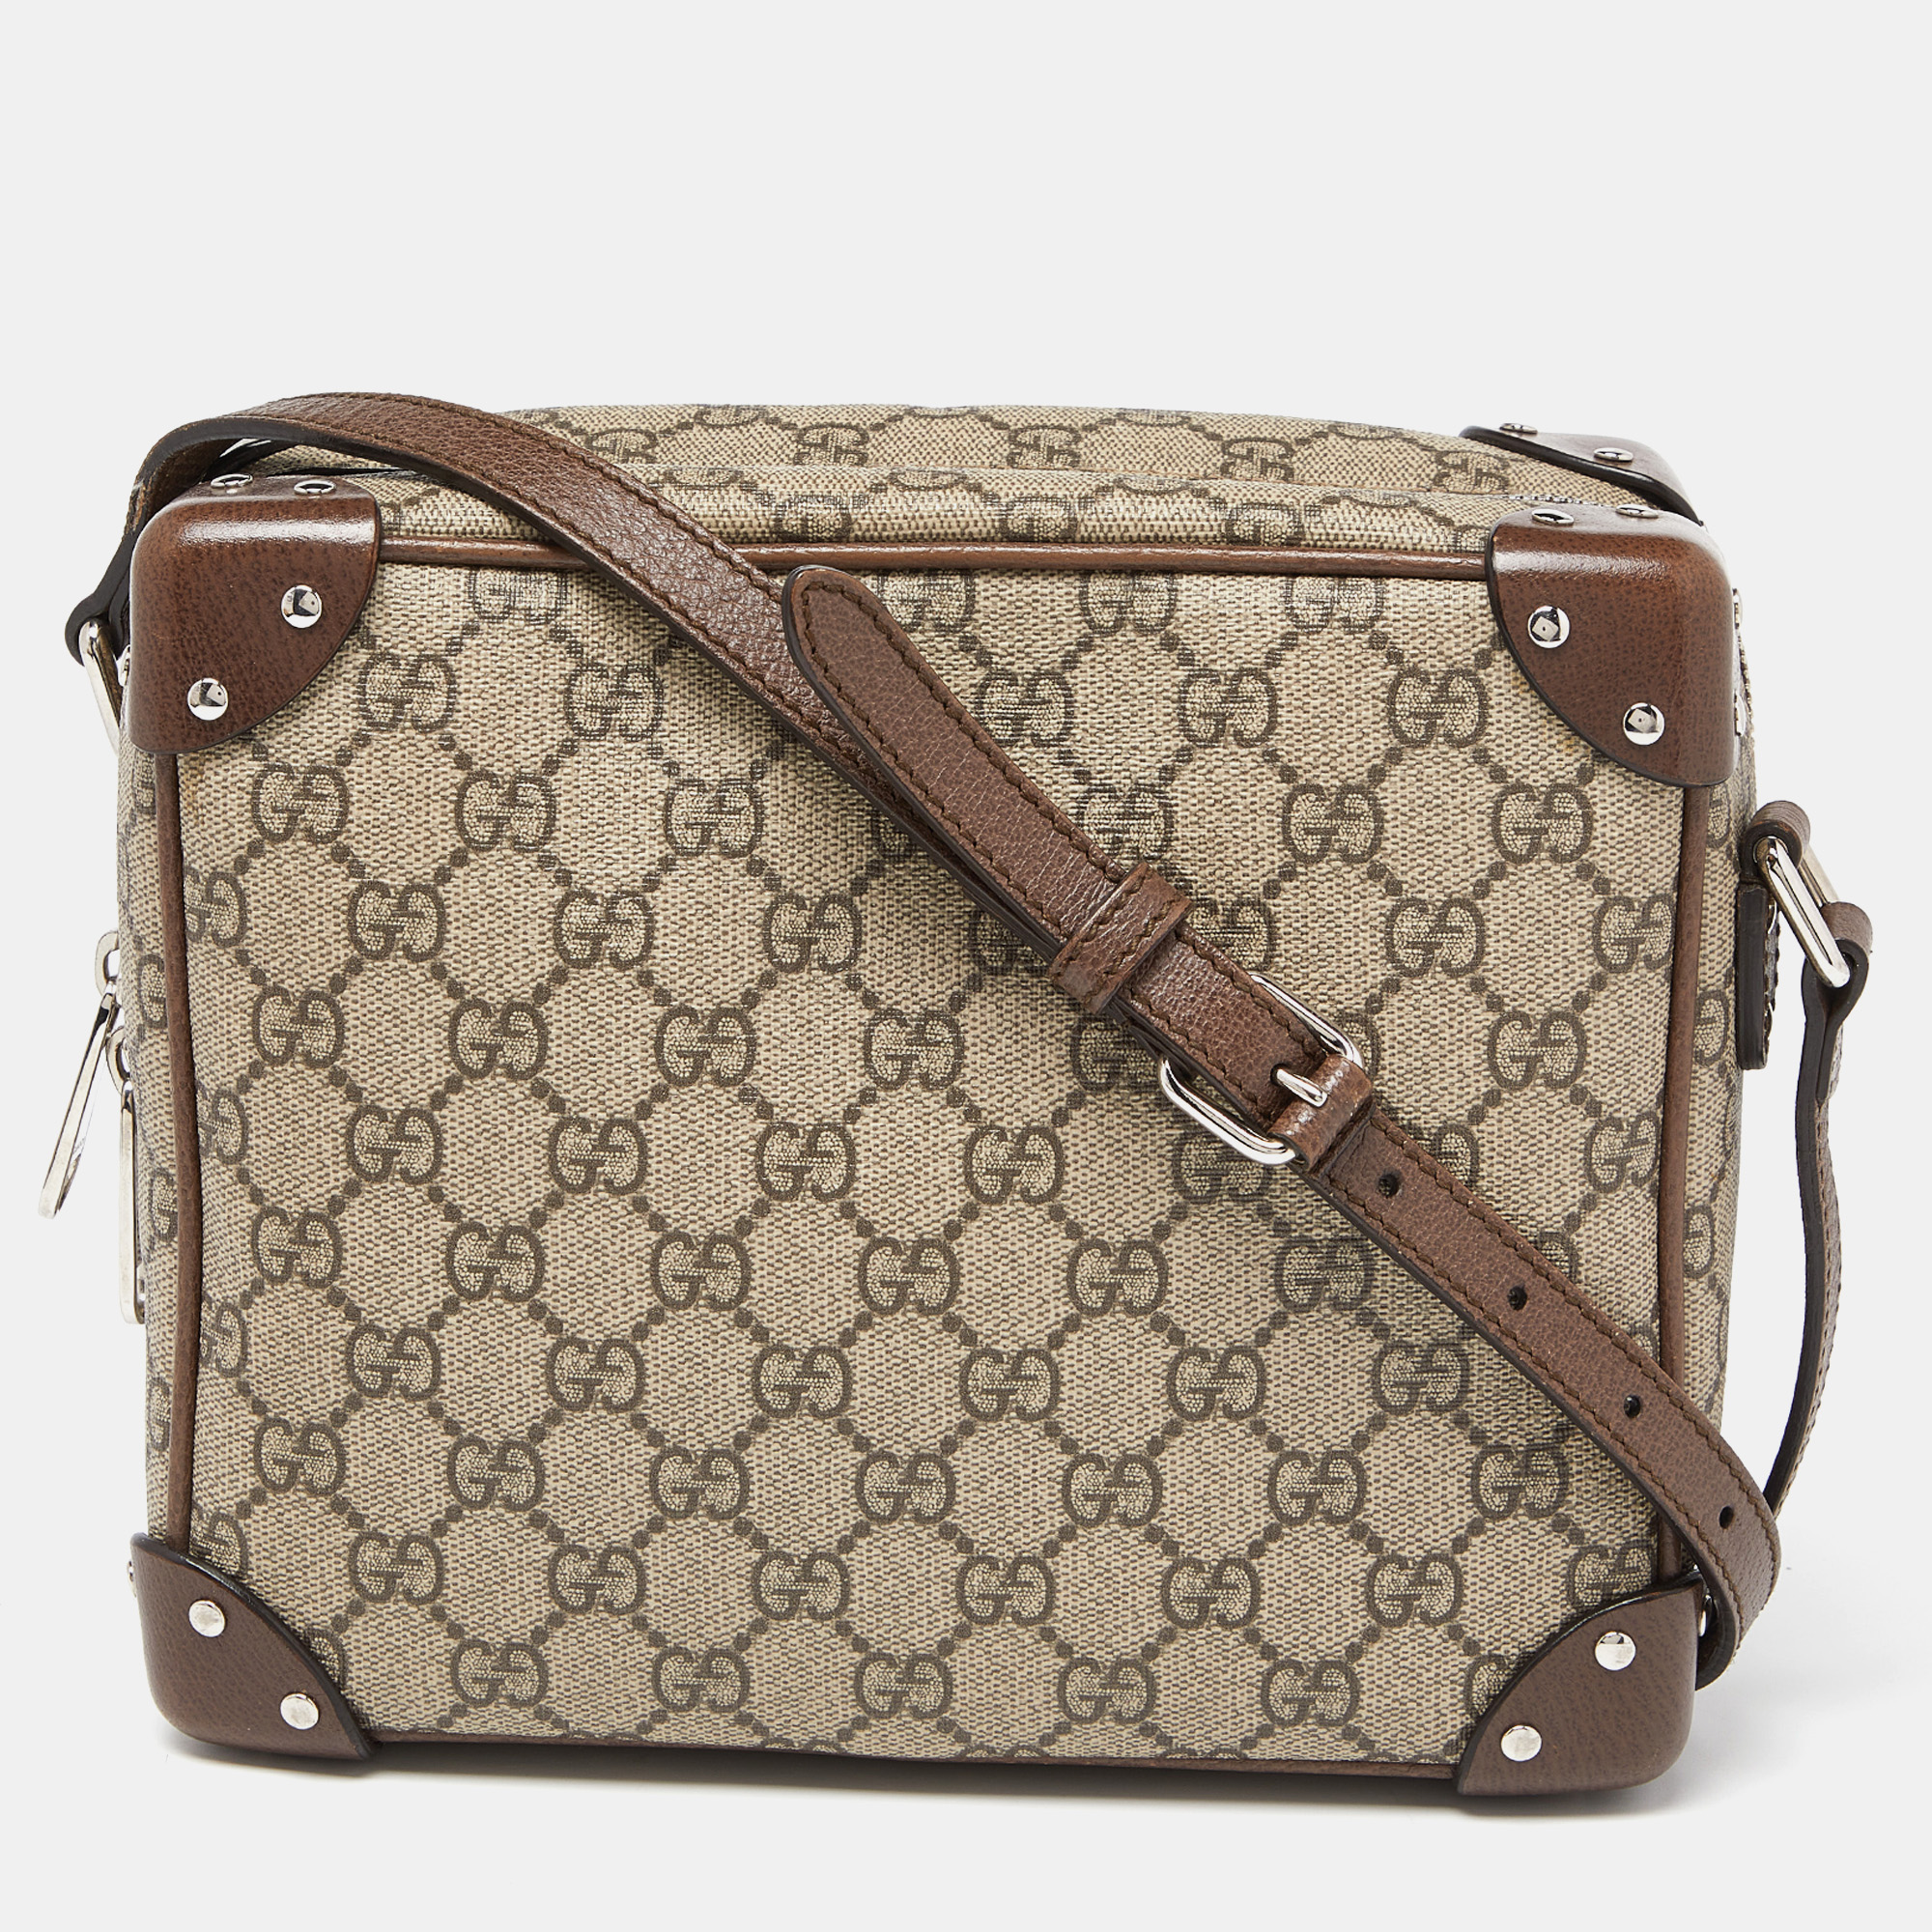 Gucci Brown/Beige GG Supreme Canvas And Leather Square Messenger Bag